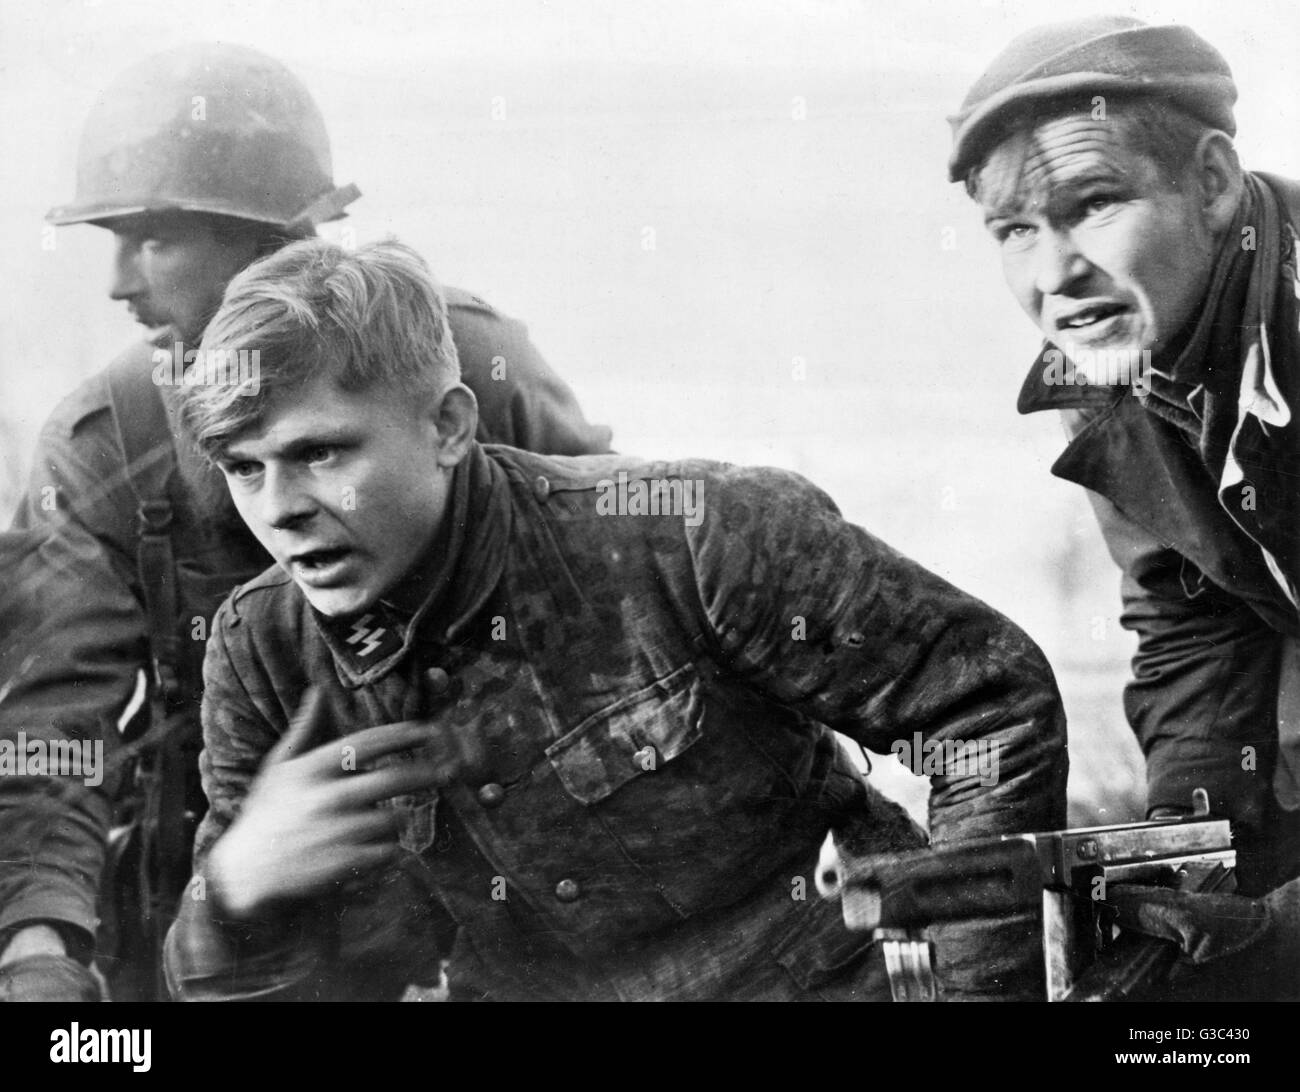 Soldiers of the 82nd American Airborne Division bring an S.S.Trooper back to Allied lines, captured between Malmedy and Marche during a reconnaissance patrol following the German counter-offensive that became known as the Battle of the Bulge.     Date: De Stock Photo